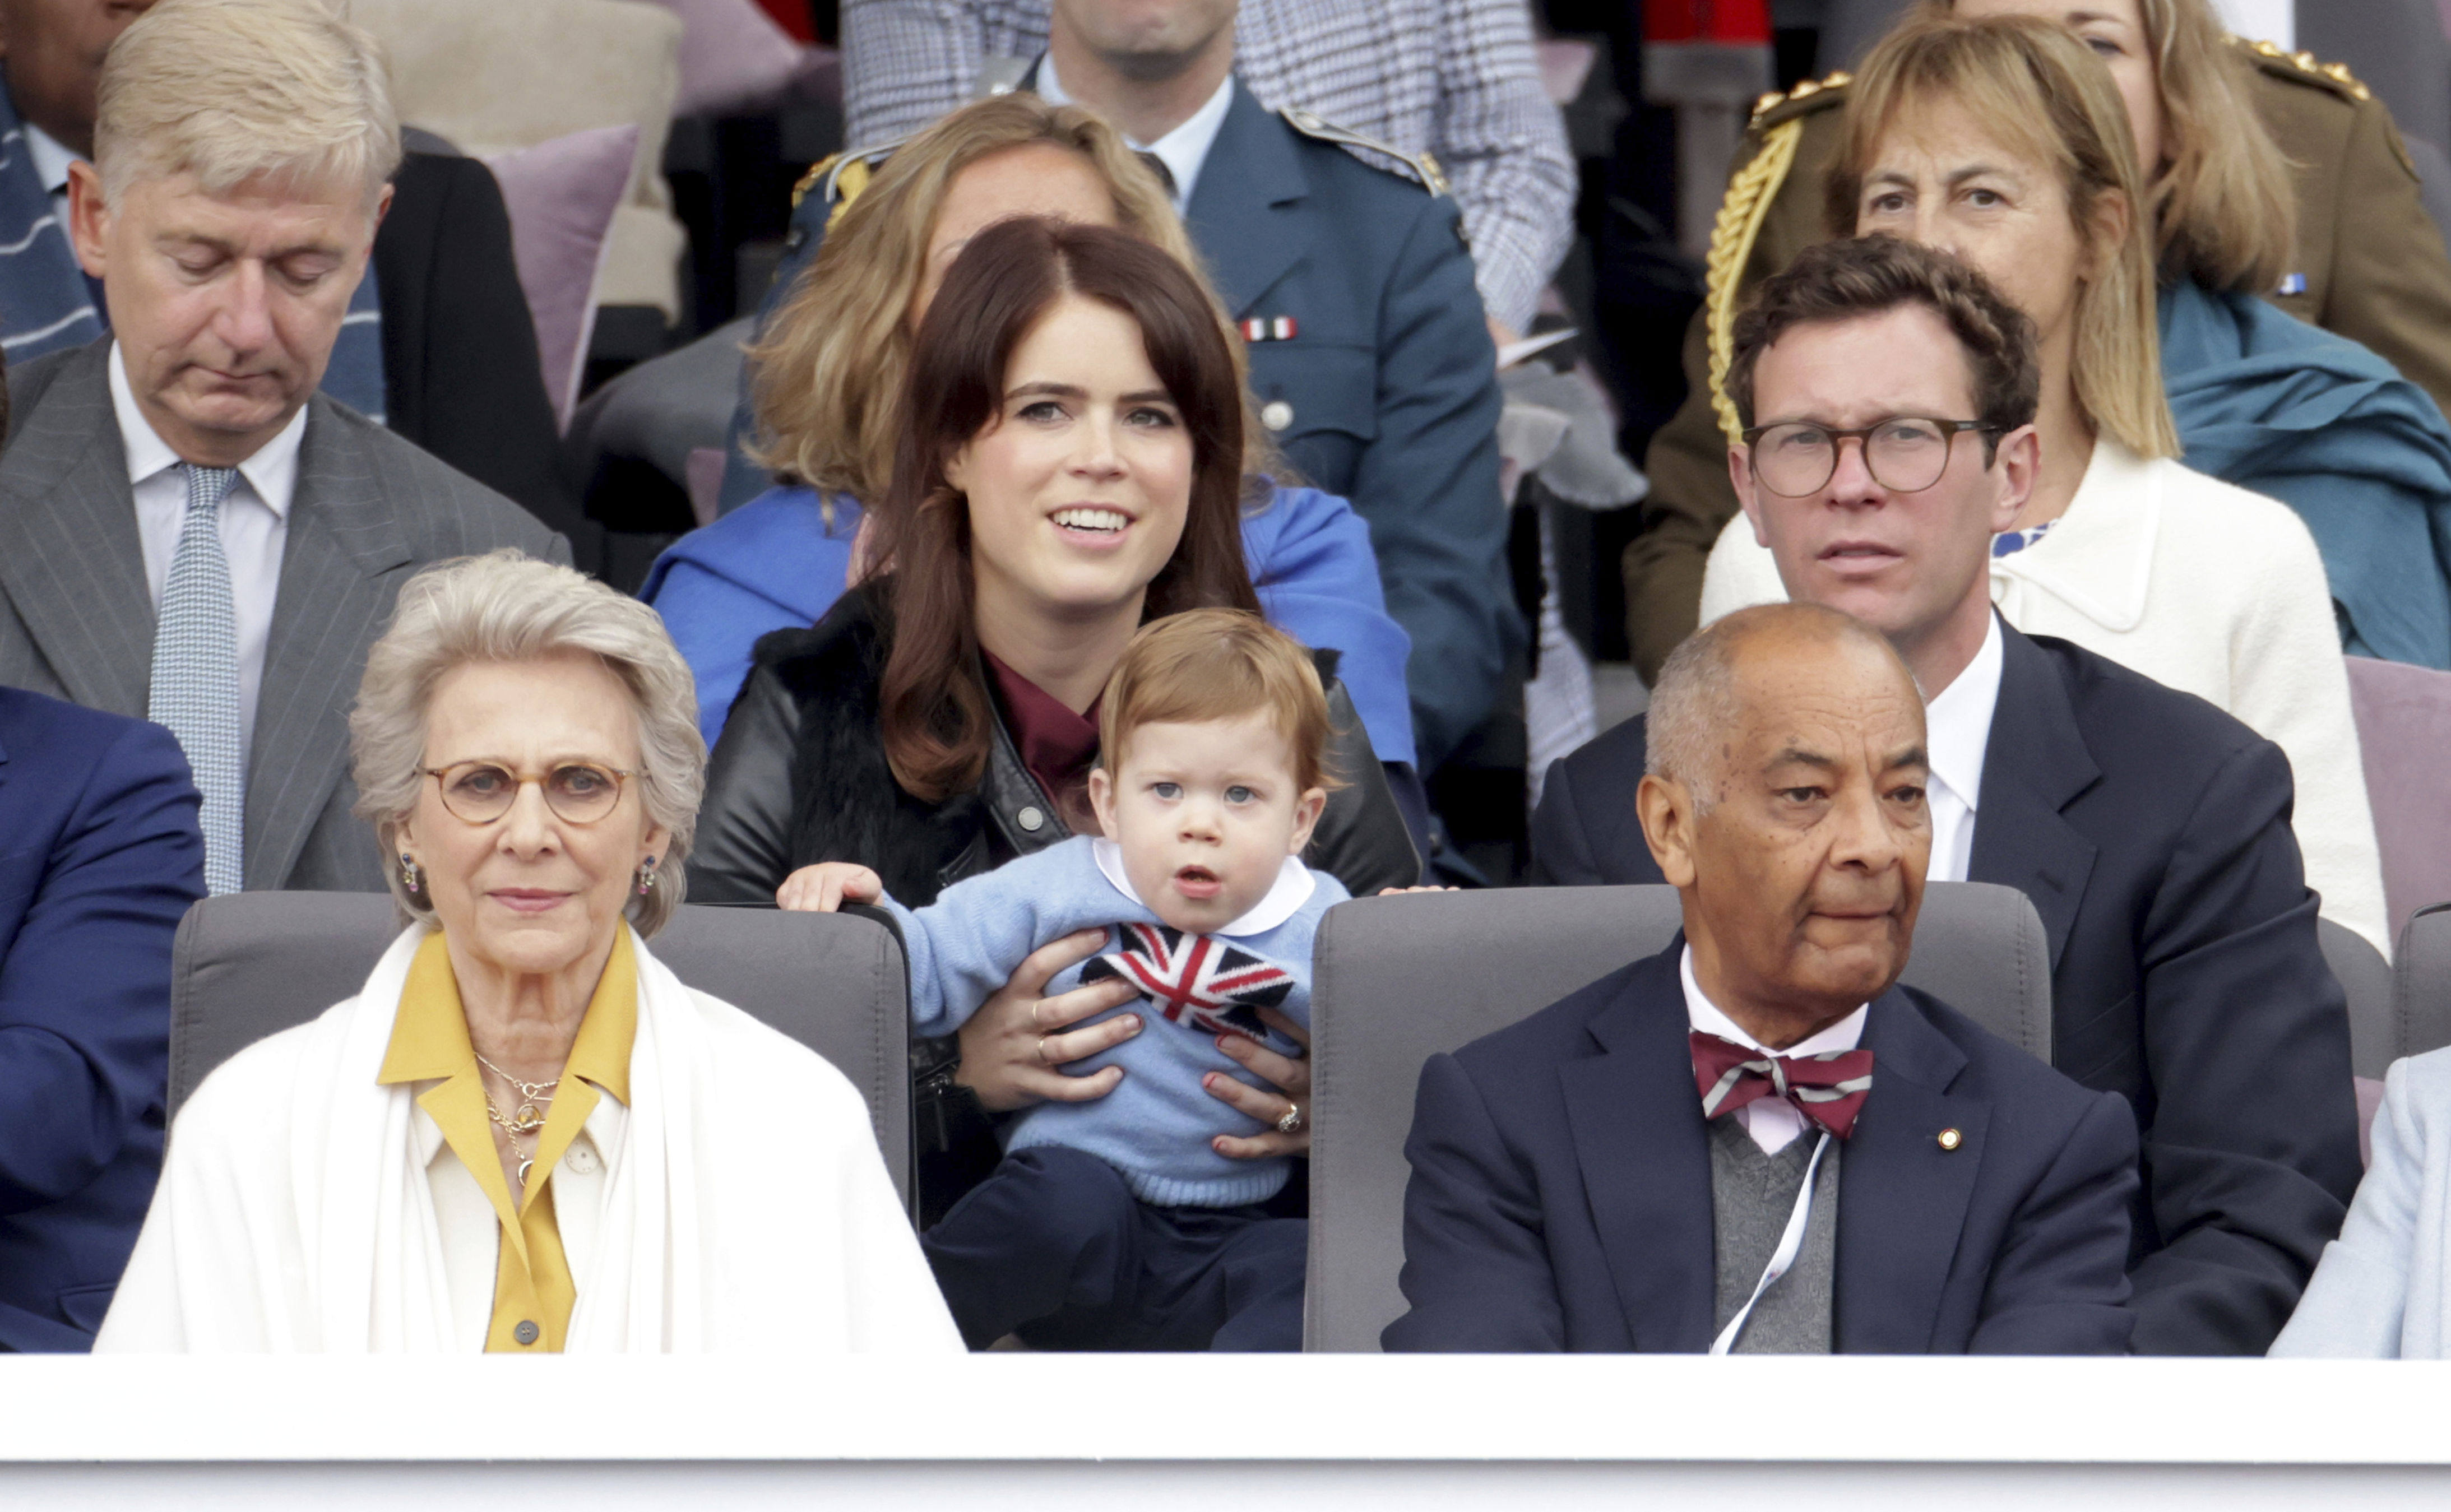 <p>Princess Eugenie and husband Jack Brooksbank's son, August Philip Hawke Brooksbank -- who was <a href="https://www.wonderwall.com/celebrity/stars-who-had-babies-adopted-children-or-revealed-births-in-2021-415575.gallery">born in February 2021</a> -- is 12th in the line of succession.</p>